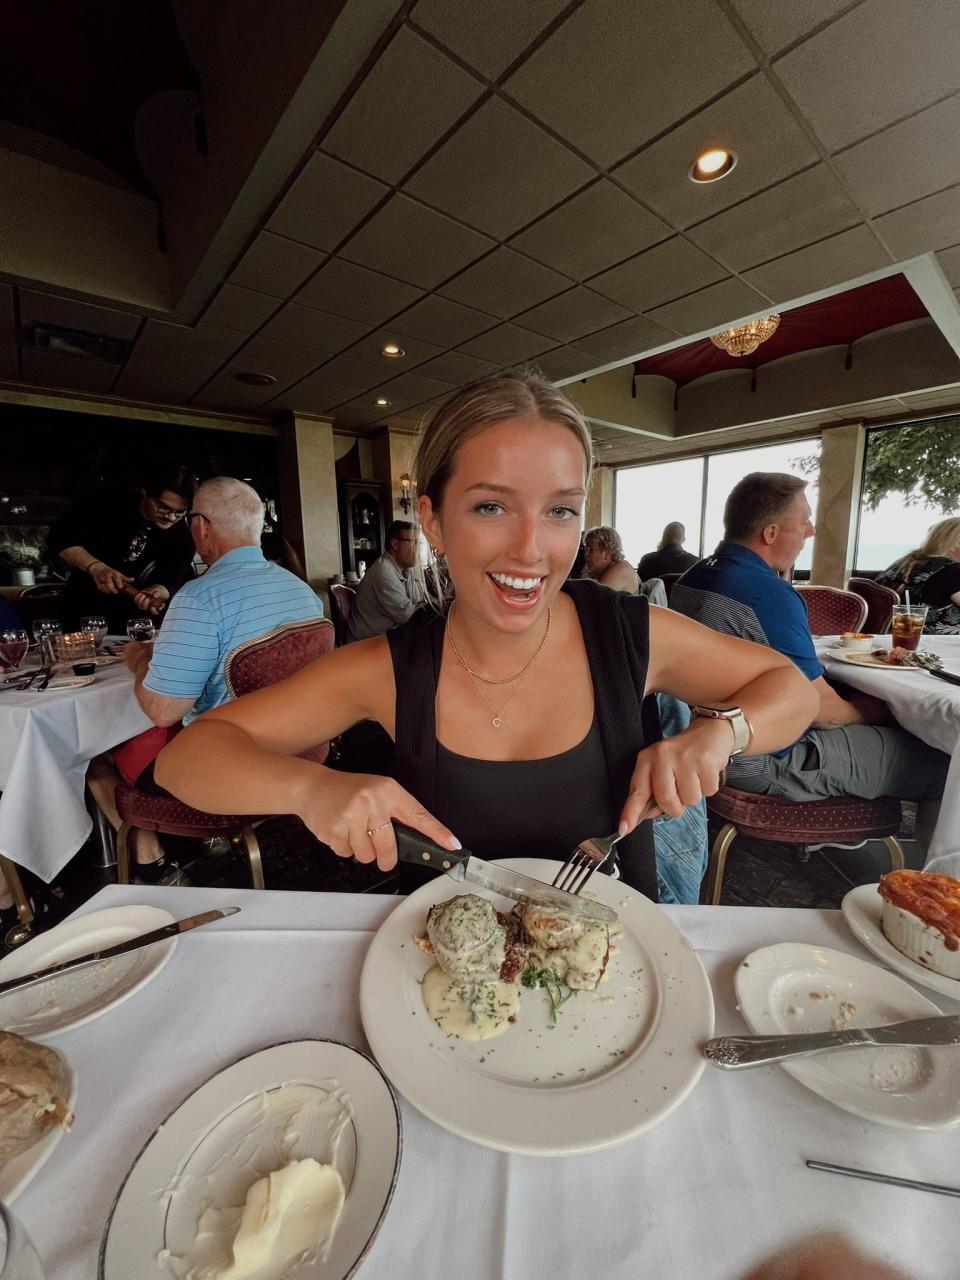 Grace Girard dining at the Hobnob supper club in Racine. The Wisconsinite will be on FOX's "Farmer Wants a Wife" Season 2, which premieres at 8 p.m. CT Feb. 1.